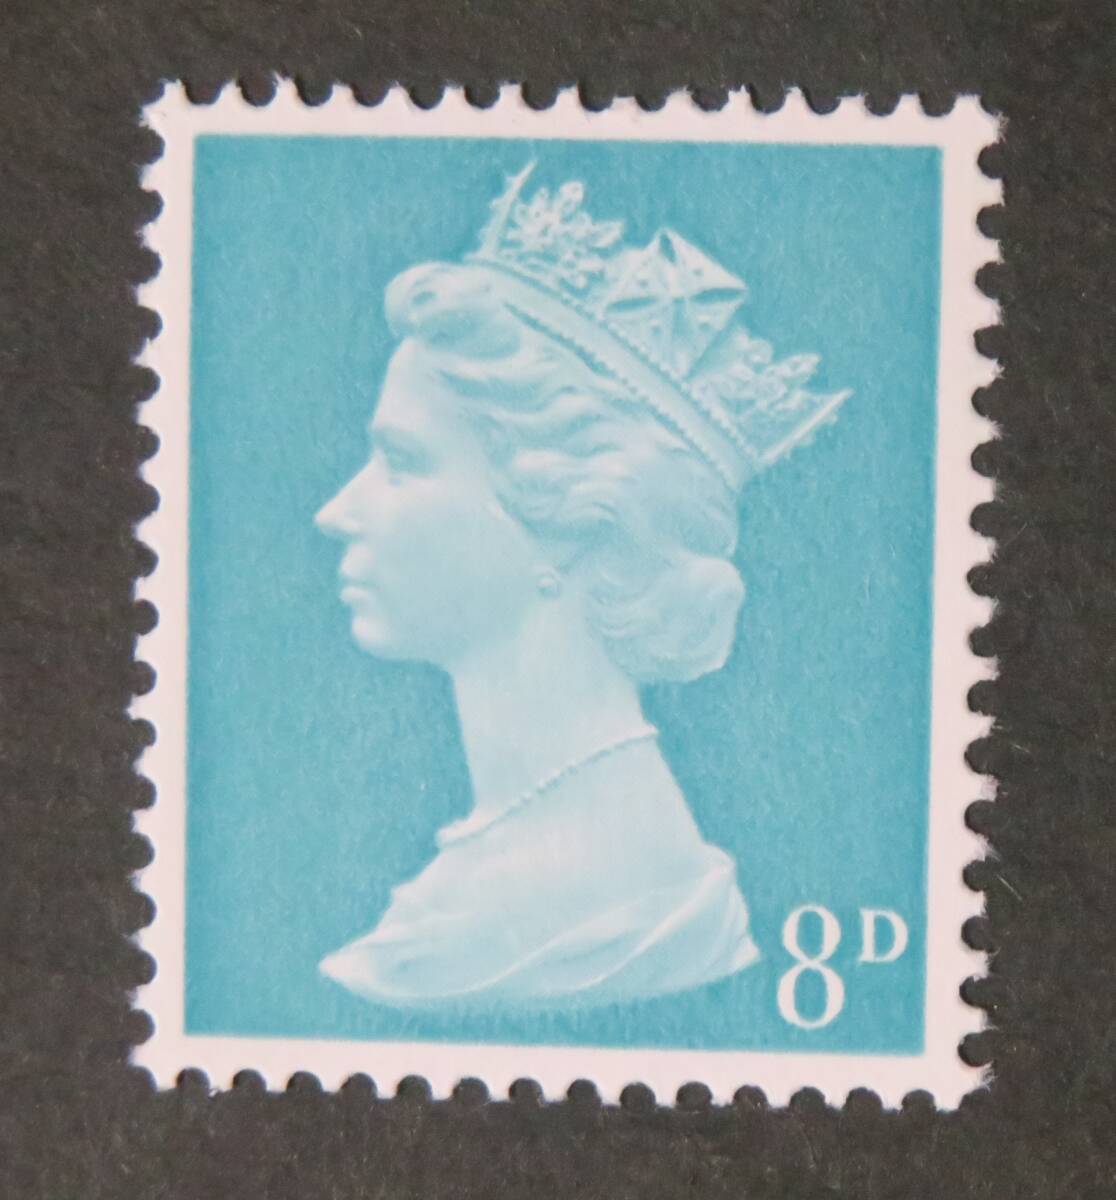 [ England stamp * ordinary stamp : unused ] Martin * type * pre tesi maru series 8d [ issue year month day *1967-70]( appraisal 0 ultimate beautiful goods )